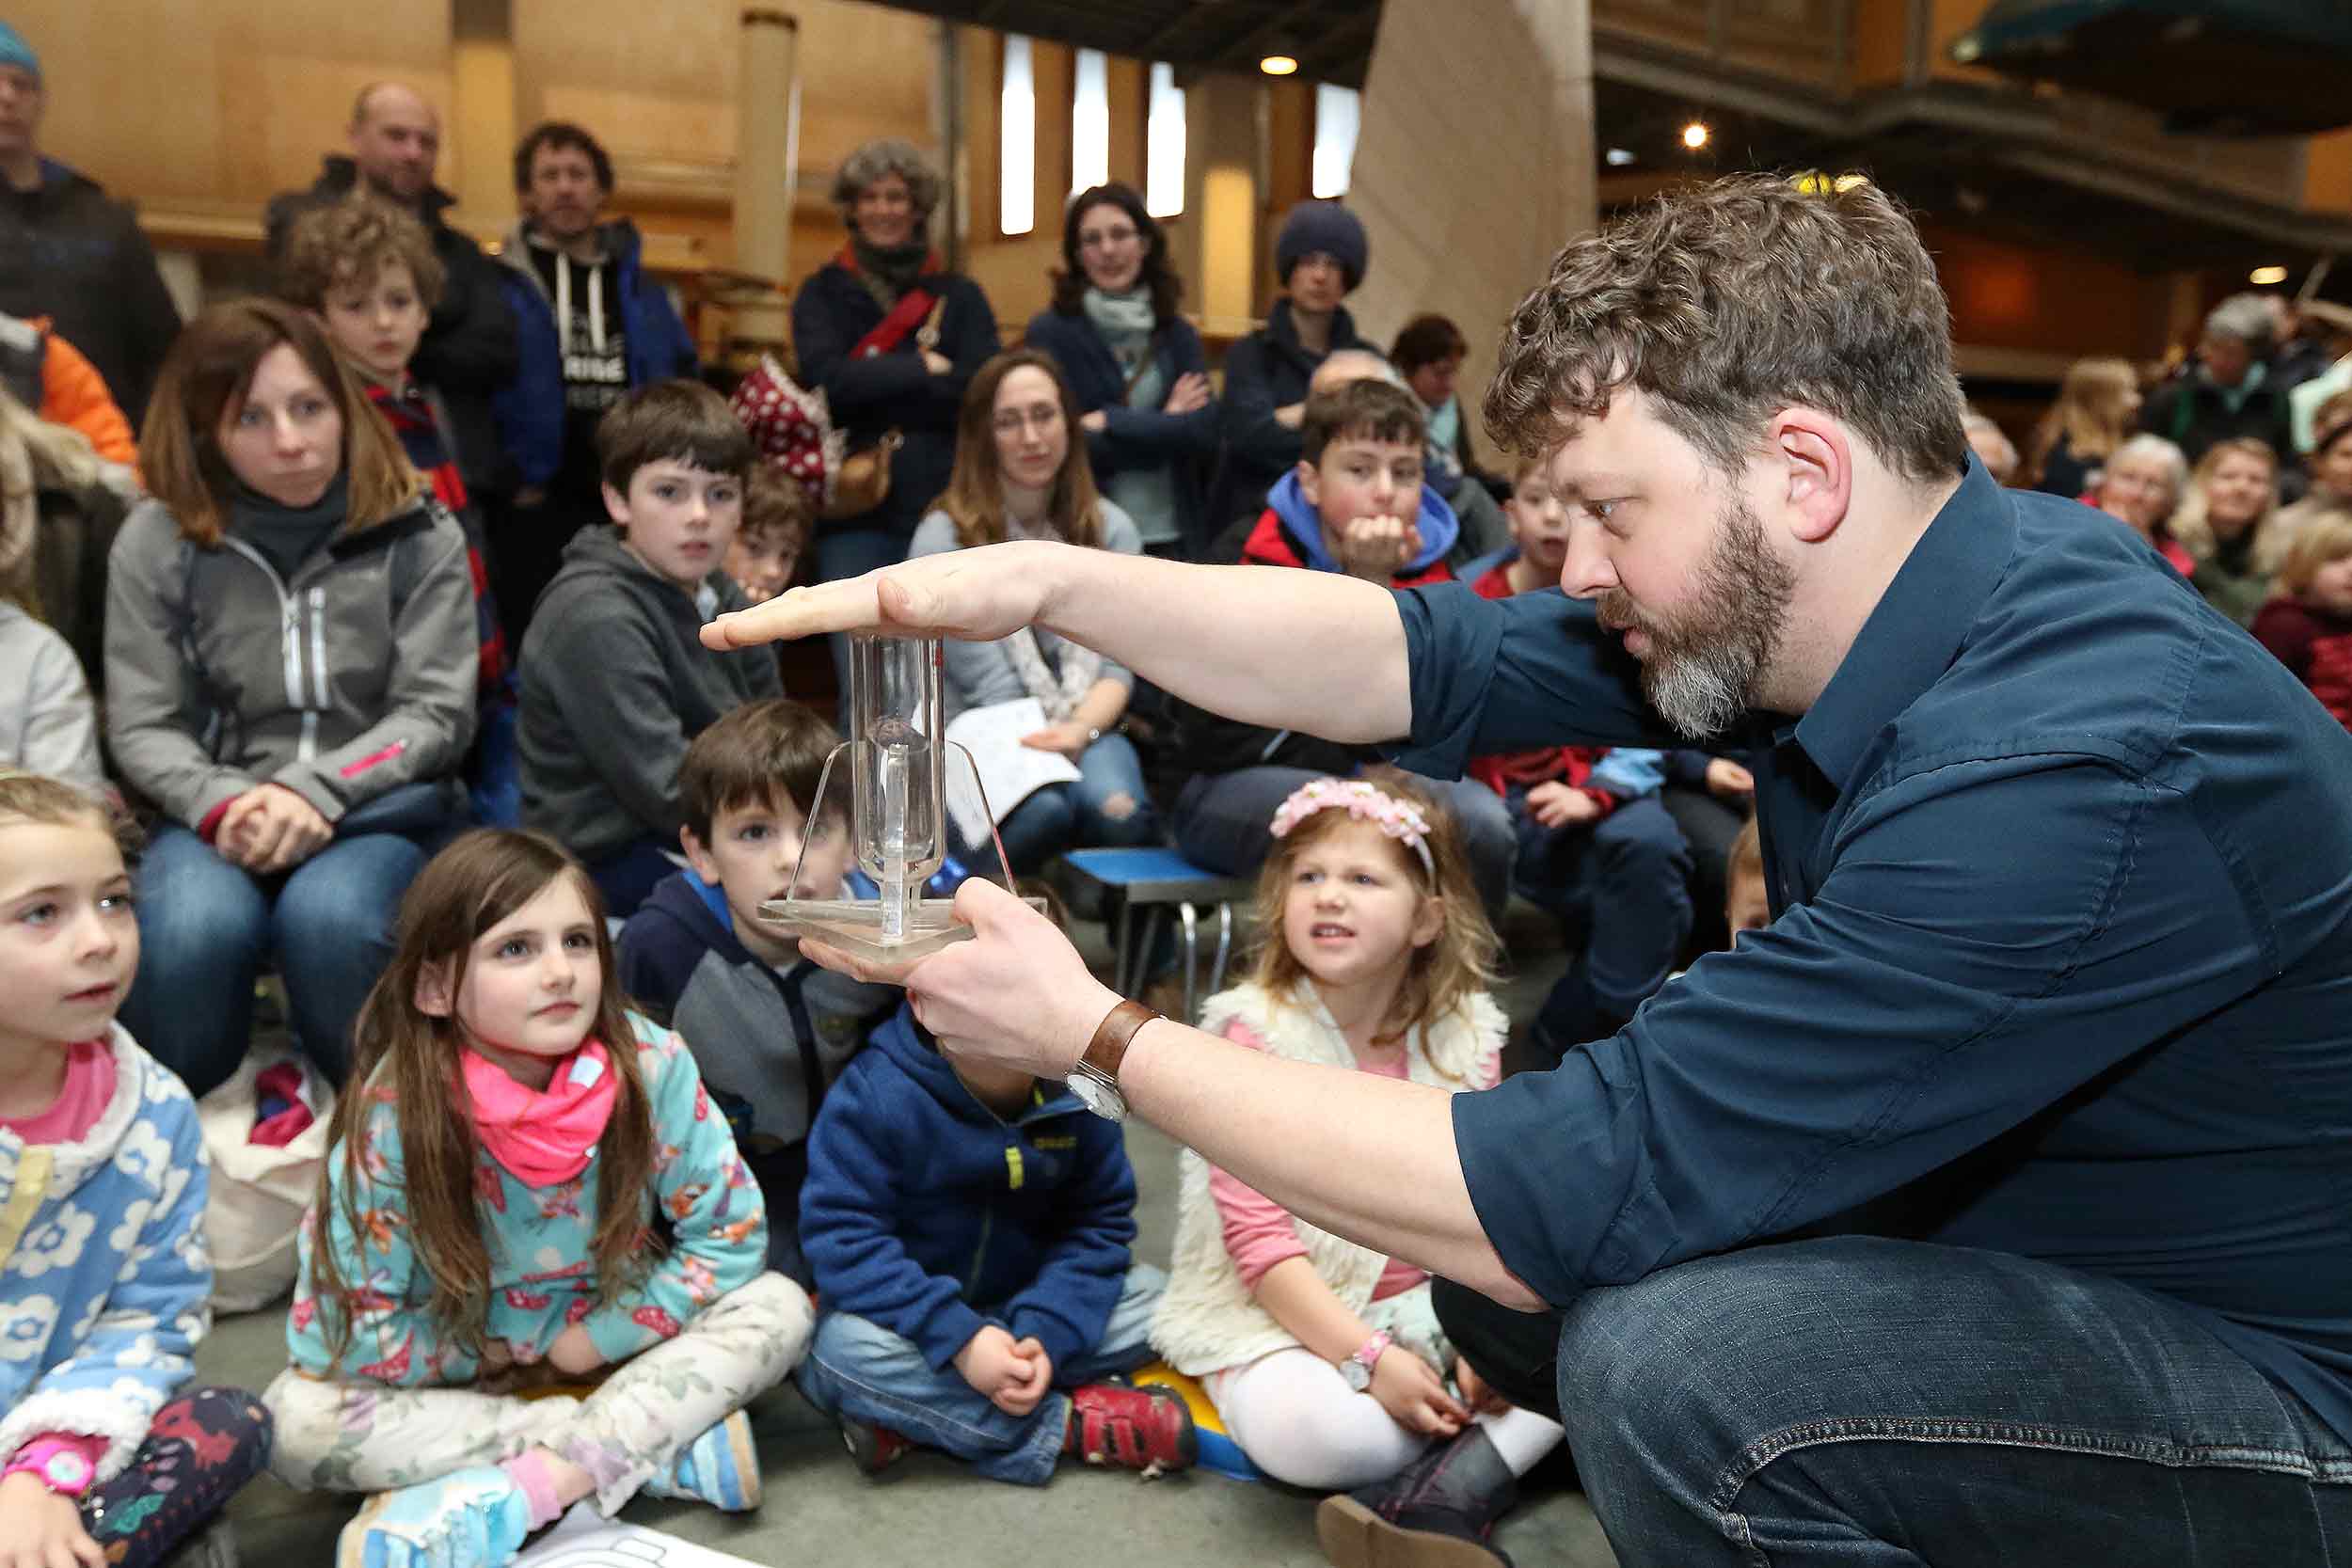 A man crouches down in front of a group of children to conduct a science demonstration.